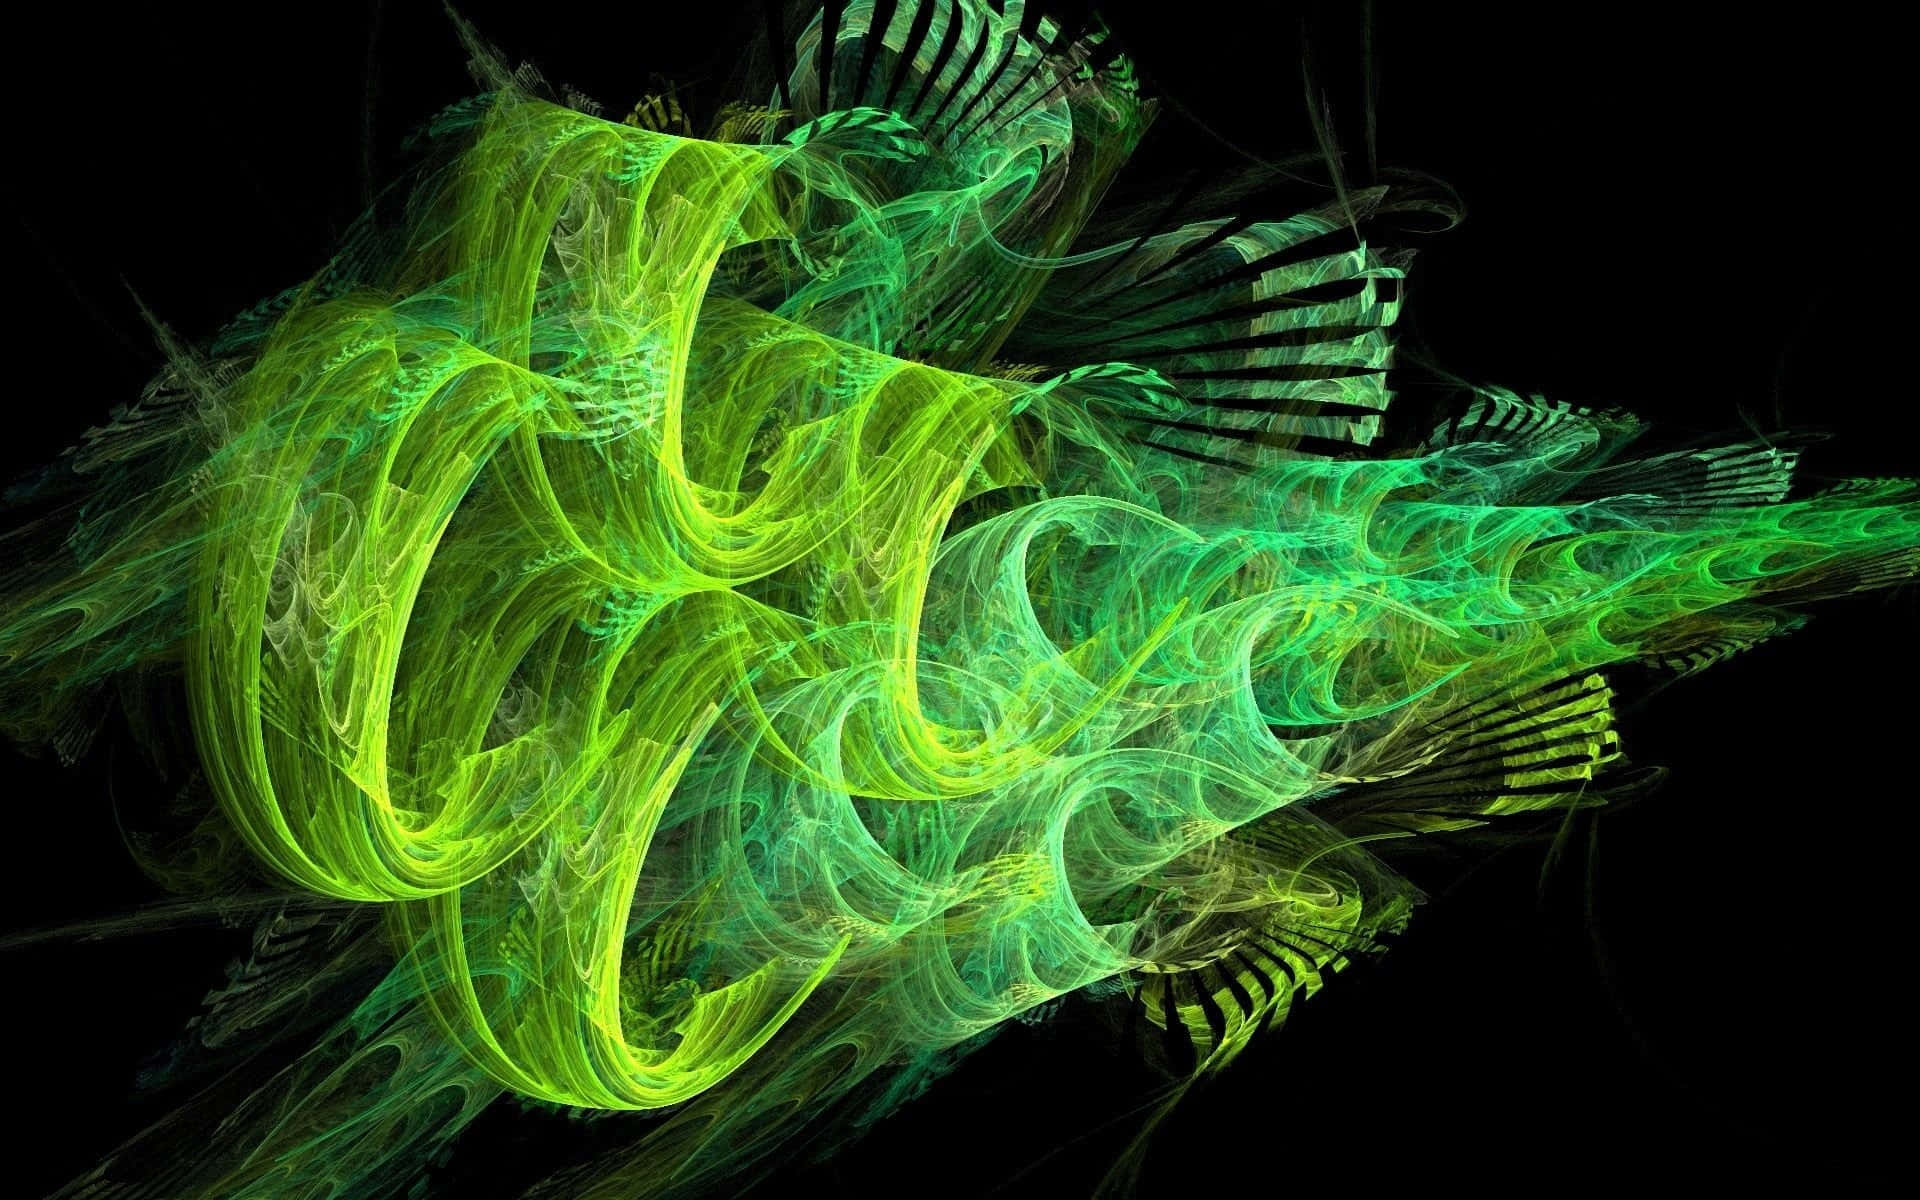 A Green Abstract Image With A Black Background